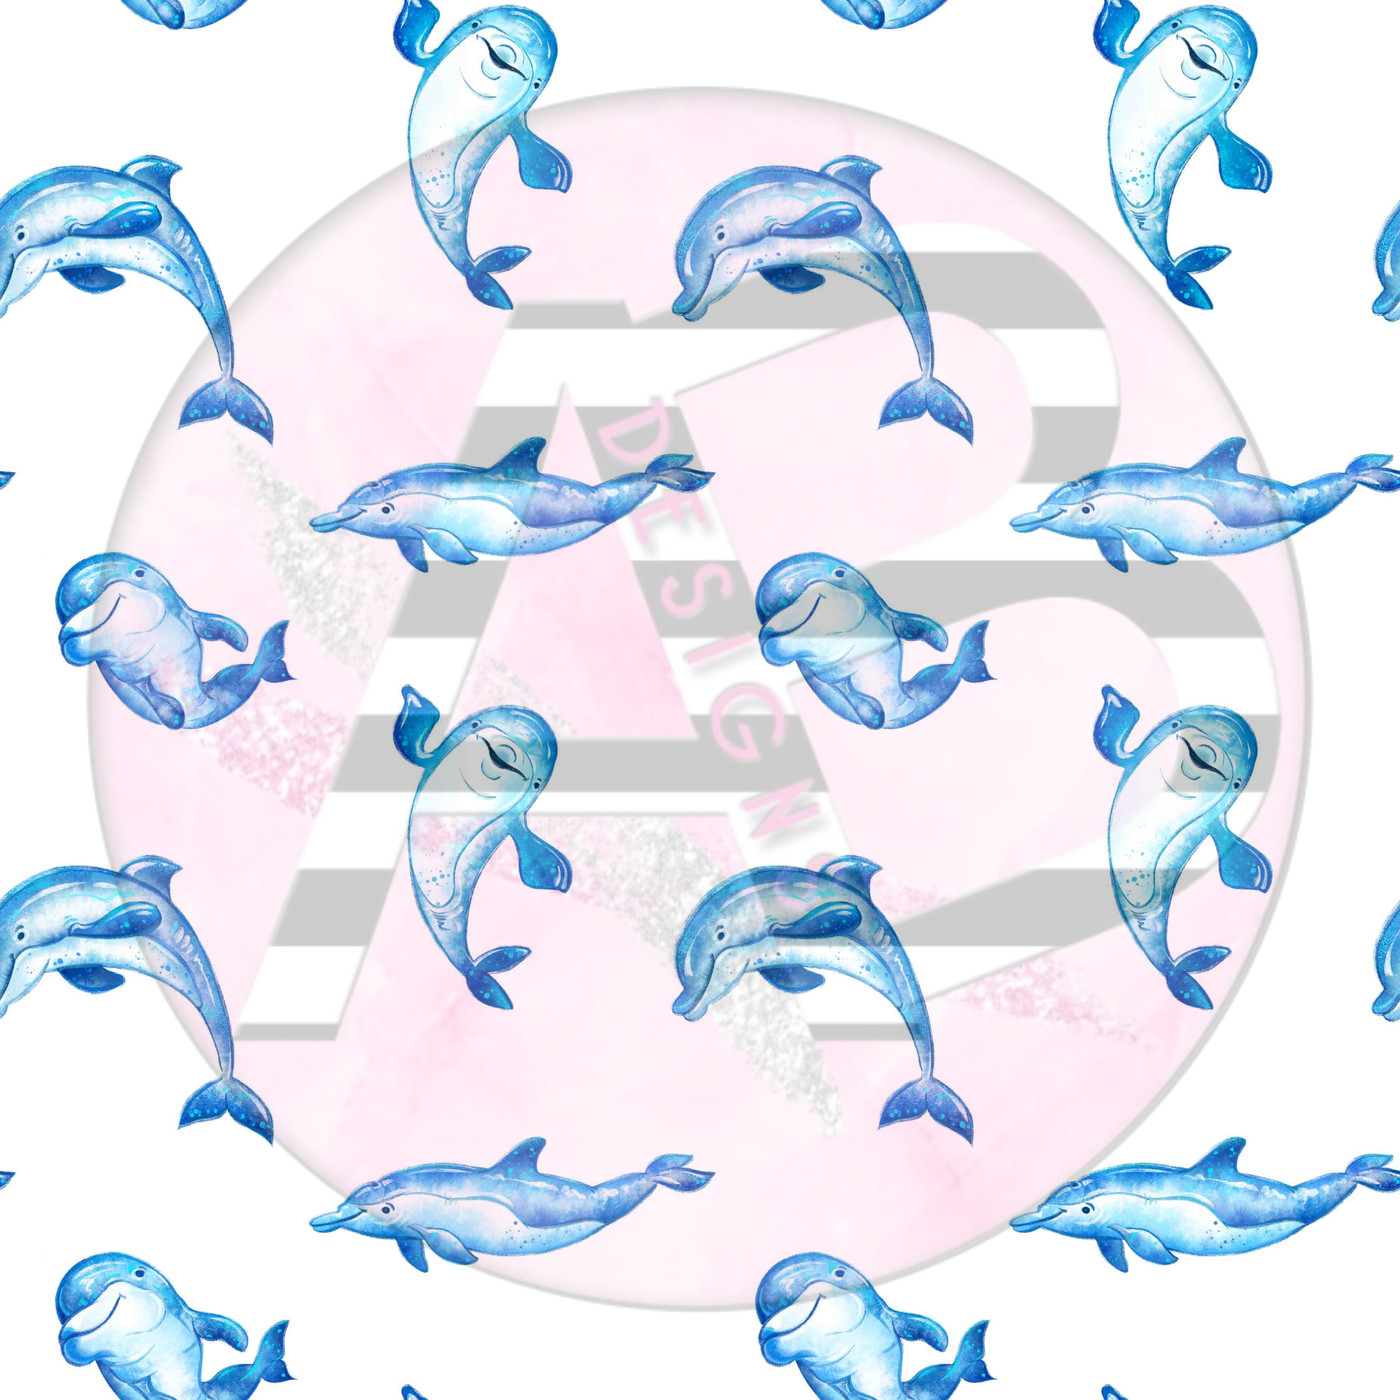 Adhesive Patterned Vinyl - Dolphin 04